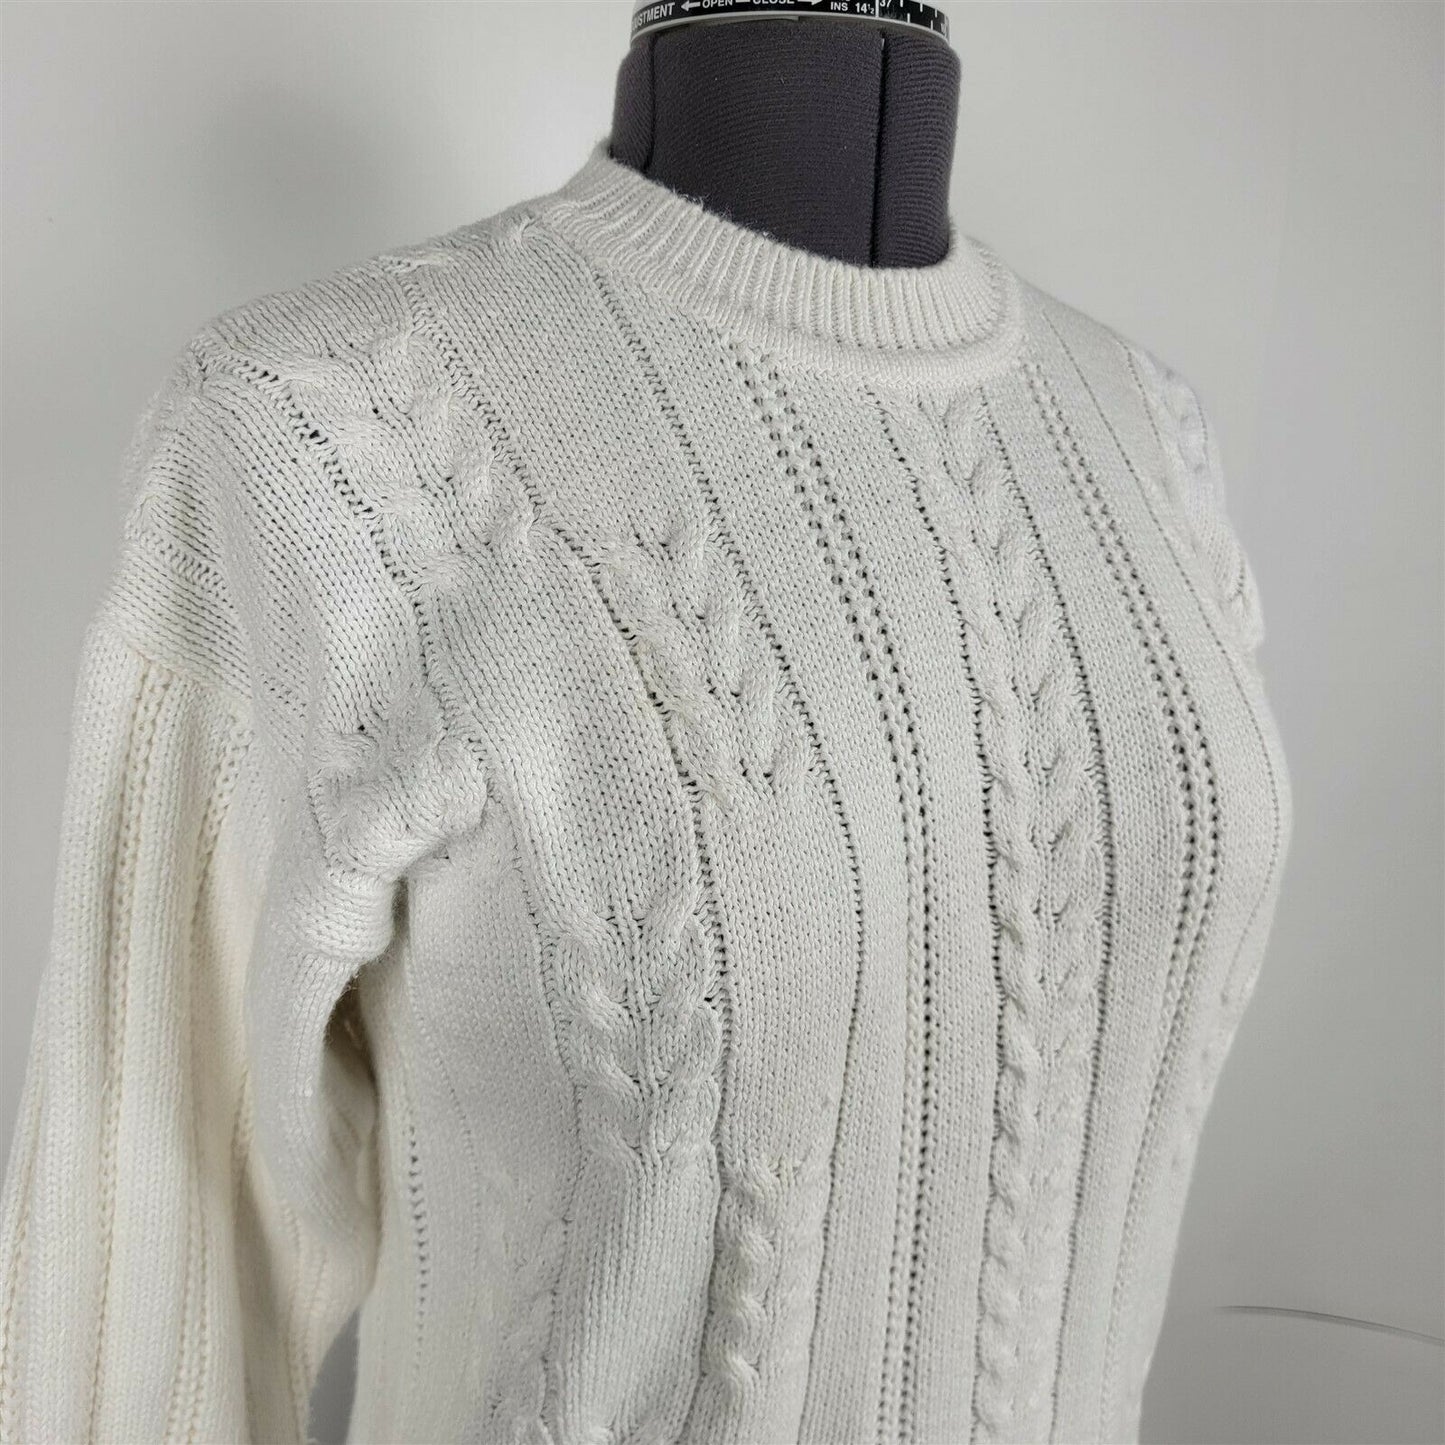 Vintage American Weekend White Cable Knit Crewneck Sweater Womens Size M